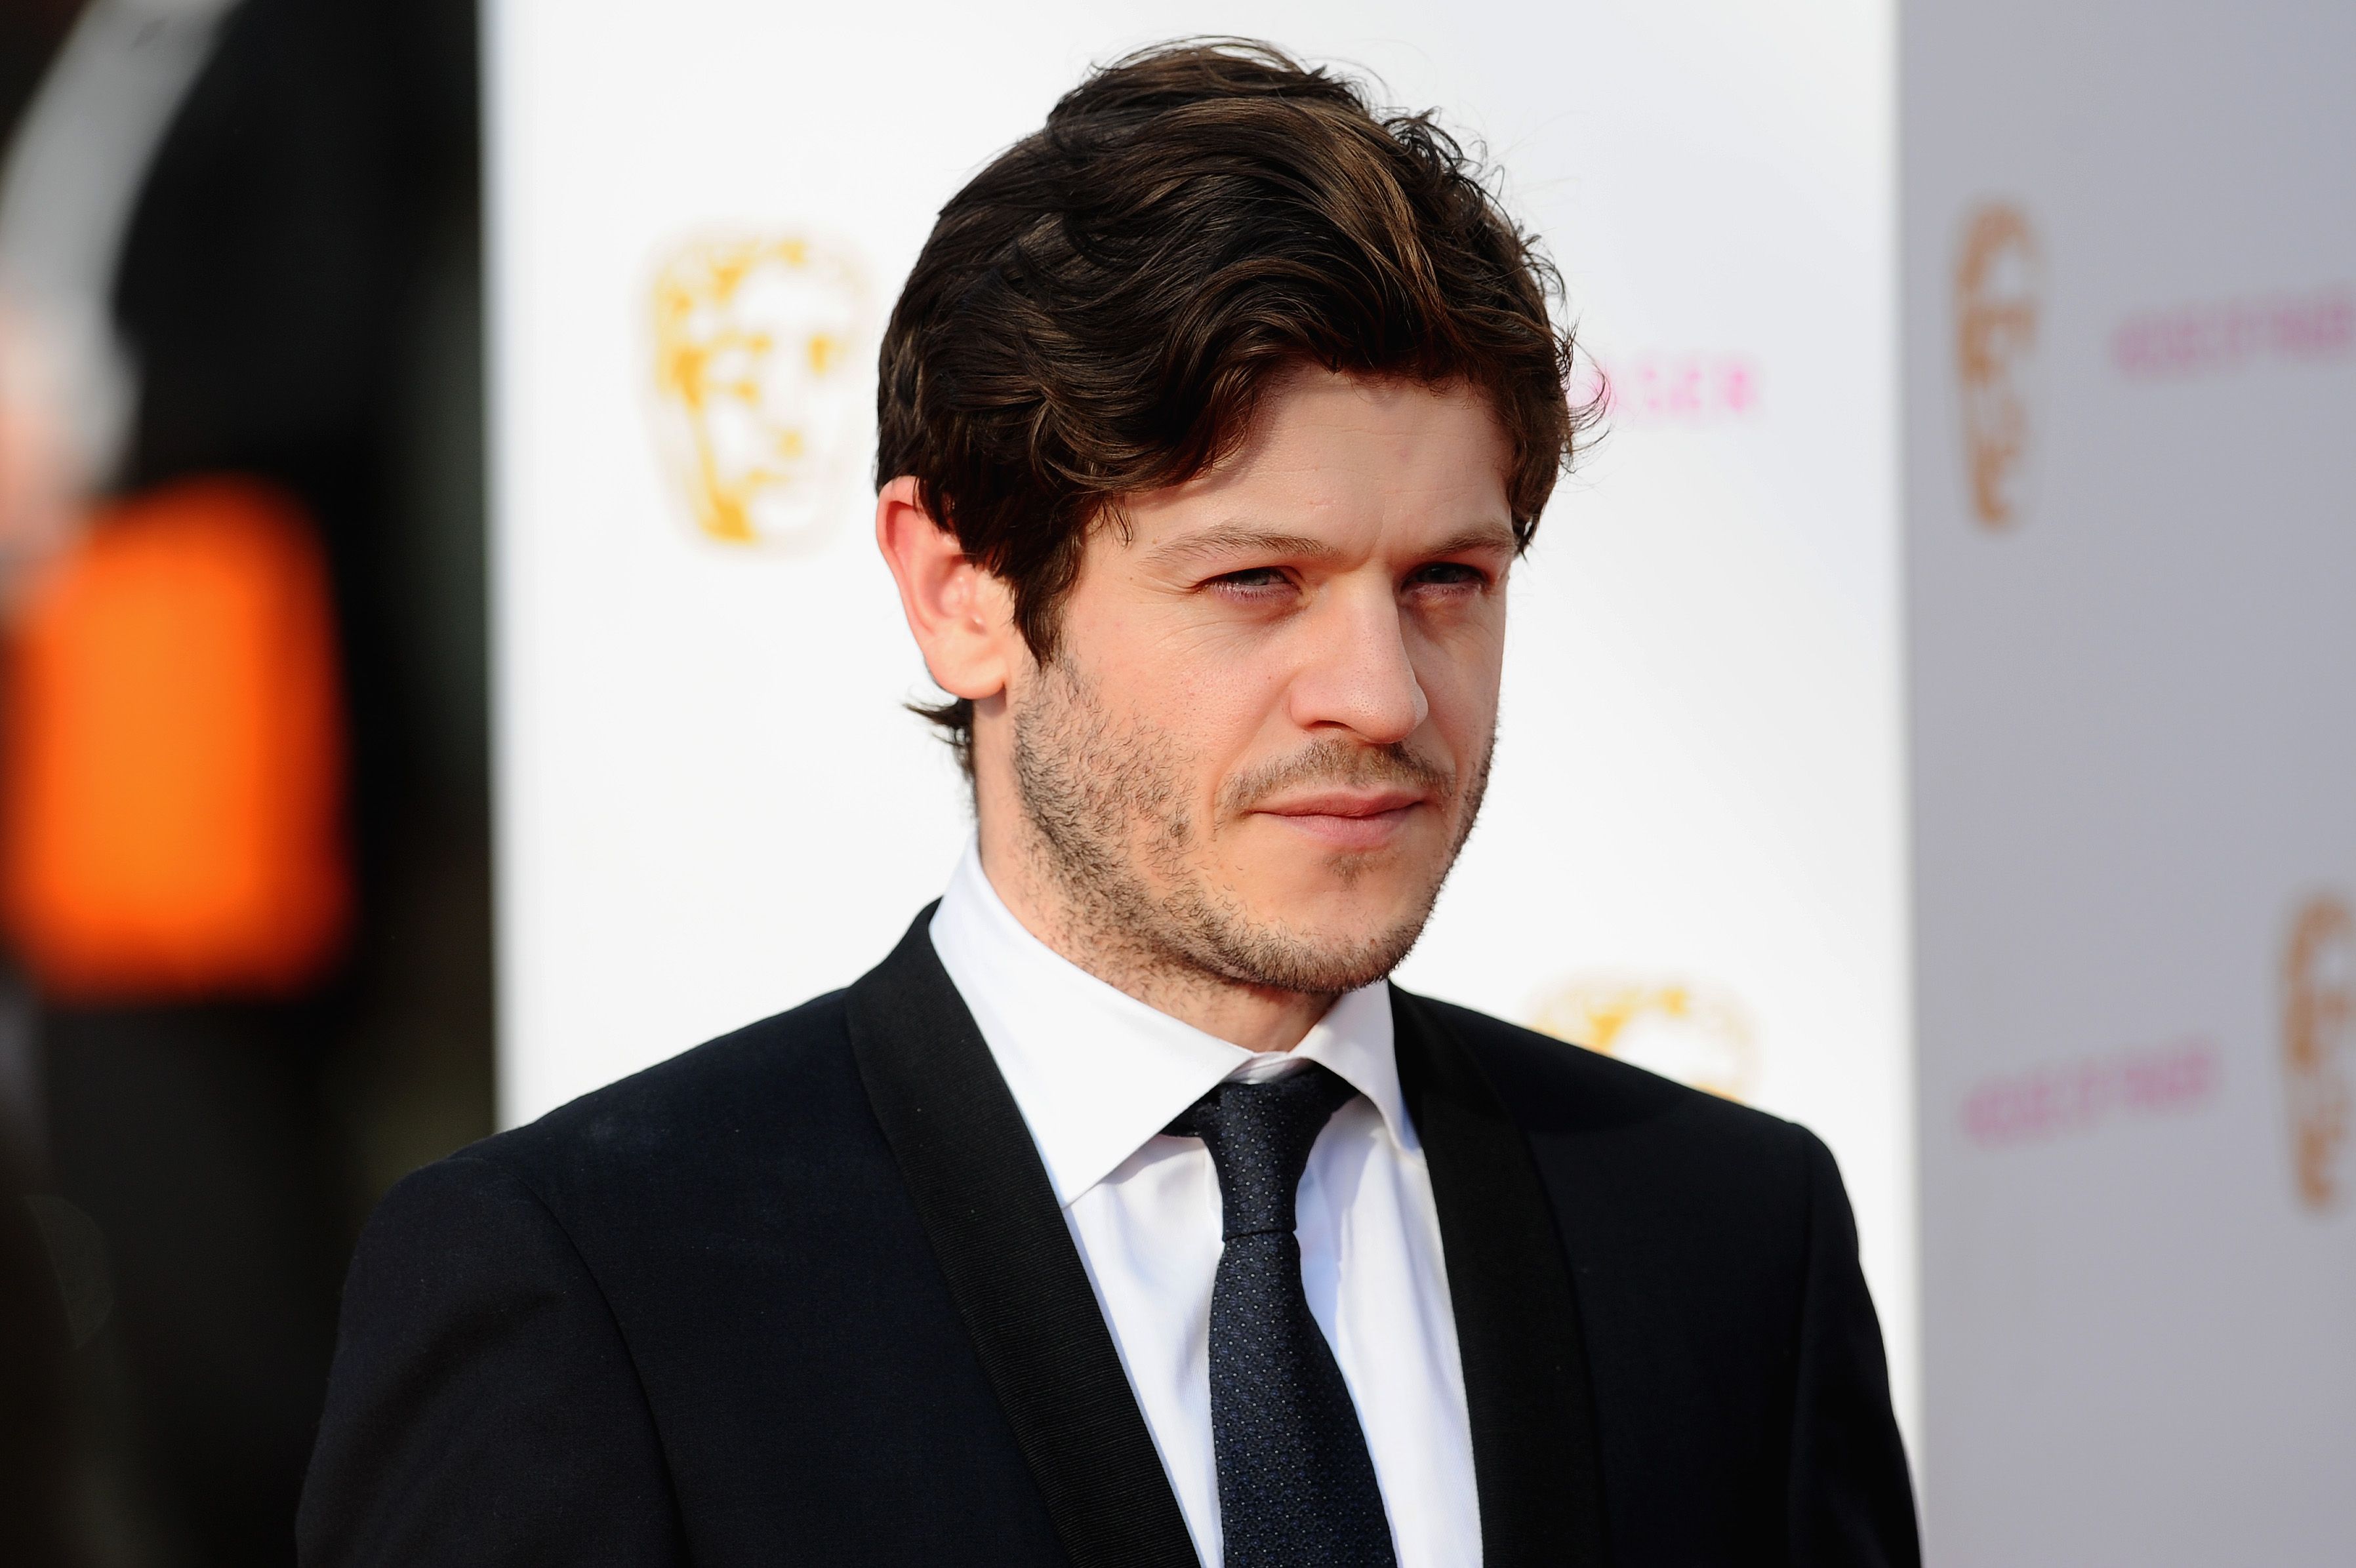 LONDON, ENGLAND - MAY 08: Iwan Rheon attends the House Of Fraser British Academy Television Awards 2016 at the Royal Festival Hall on May 8, 2016 in London, England. (Photo by Stuart C. Wilson/Getty Images)